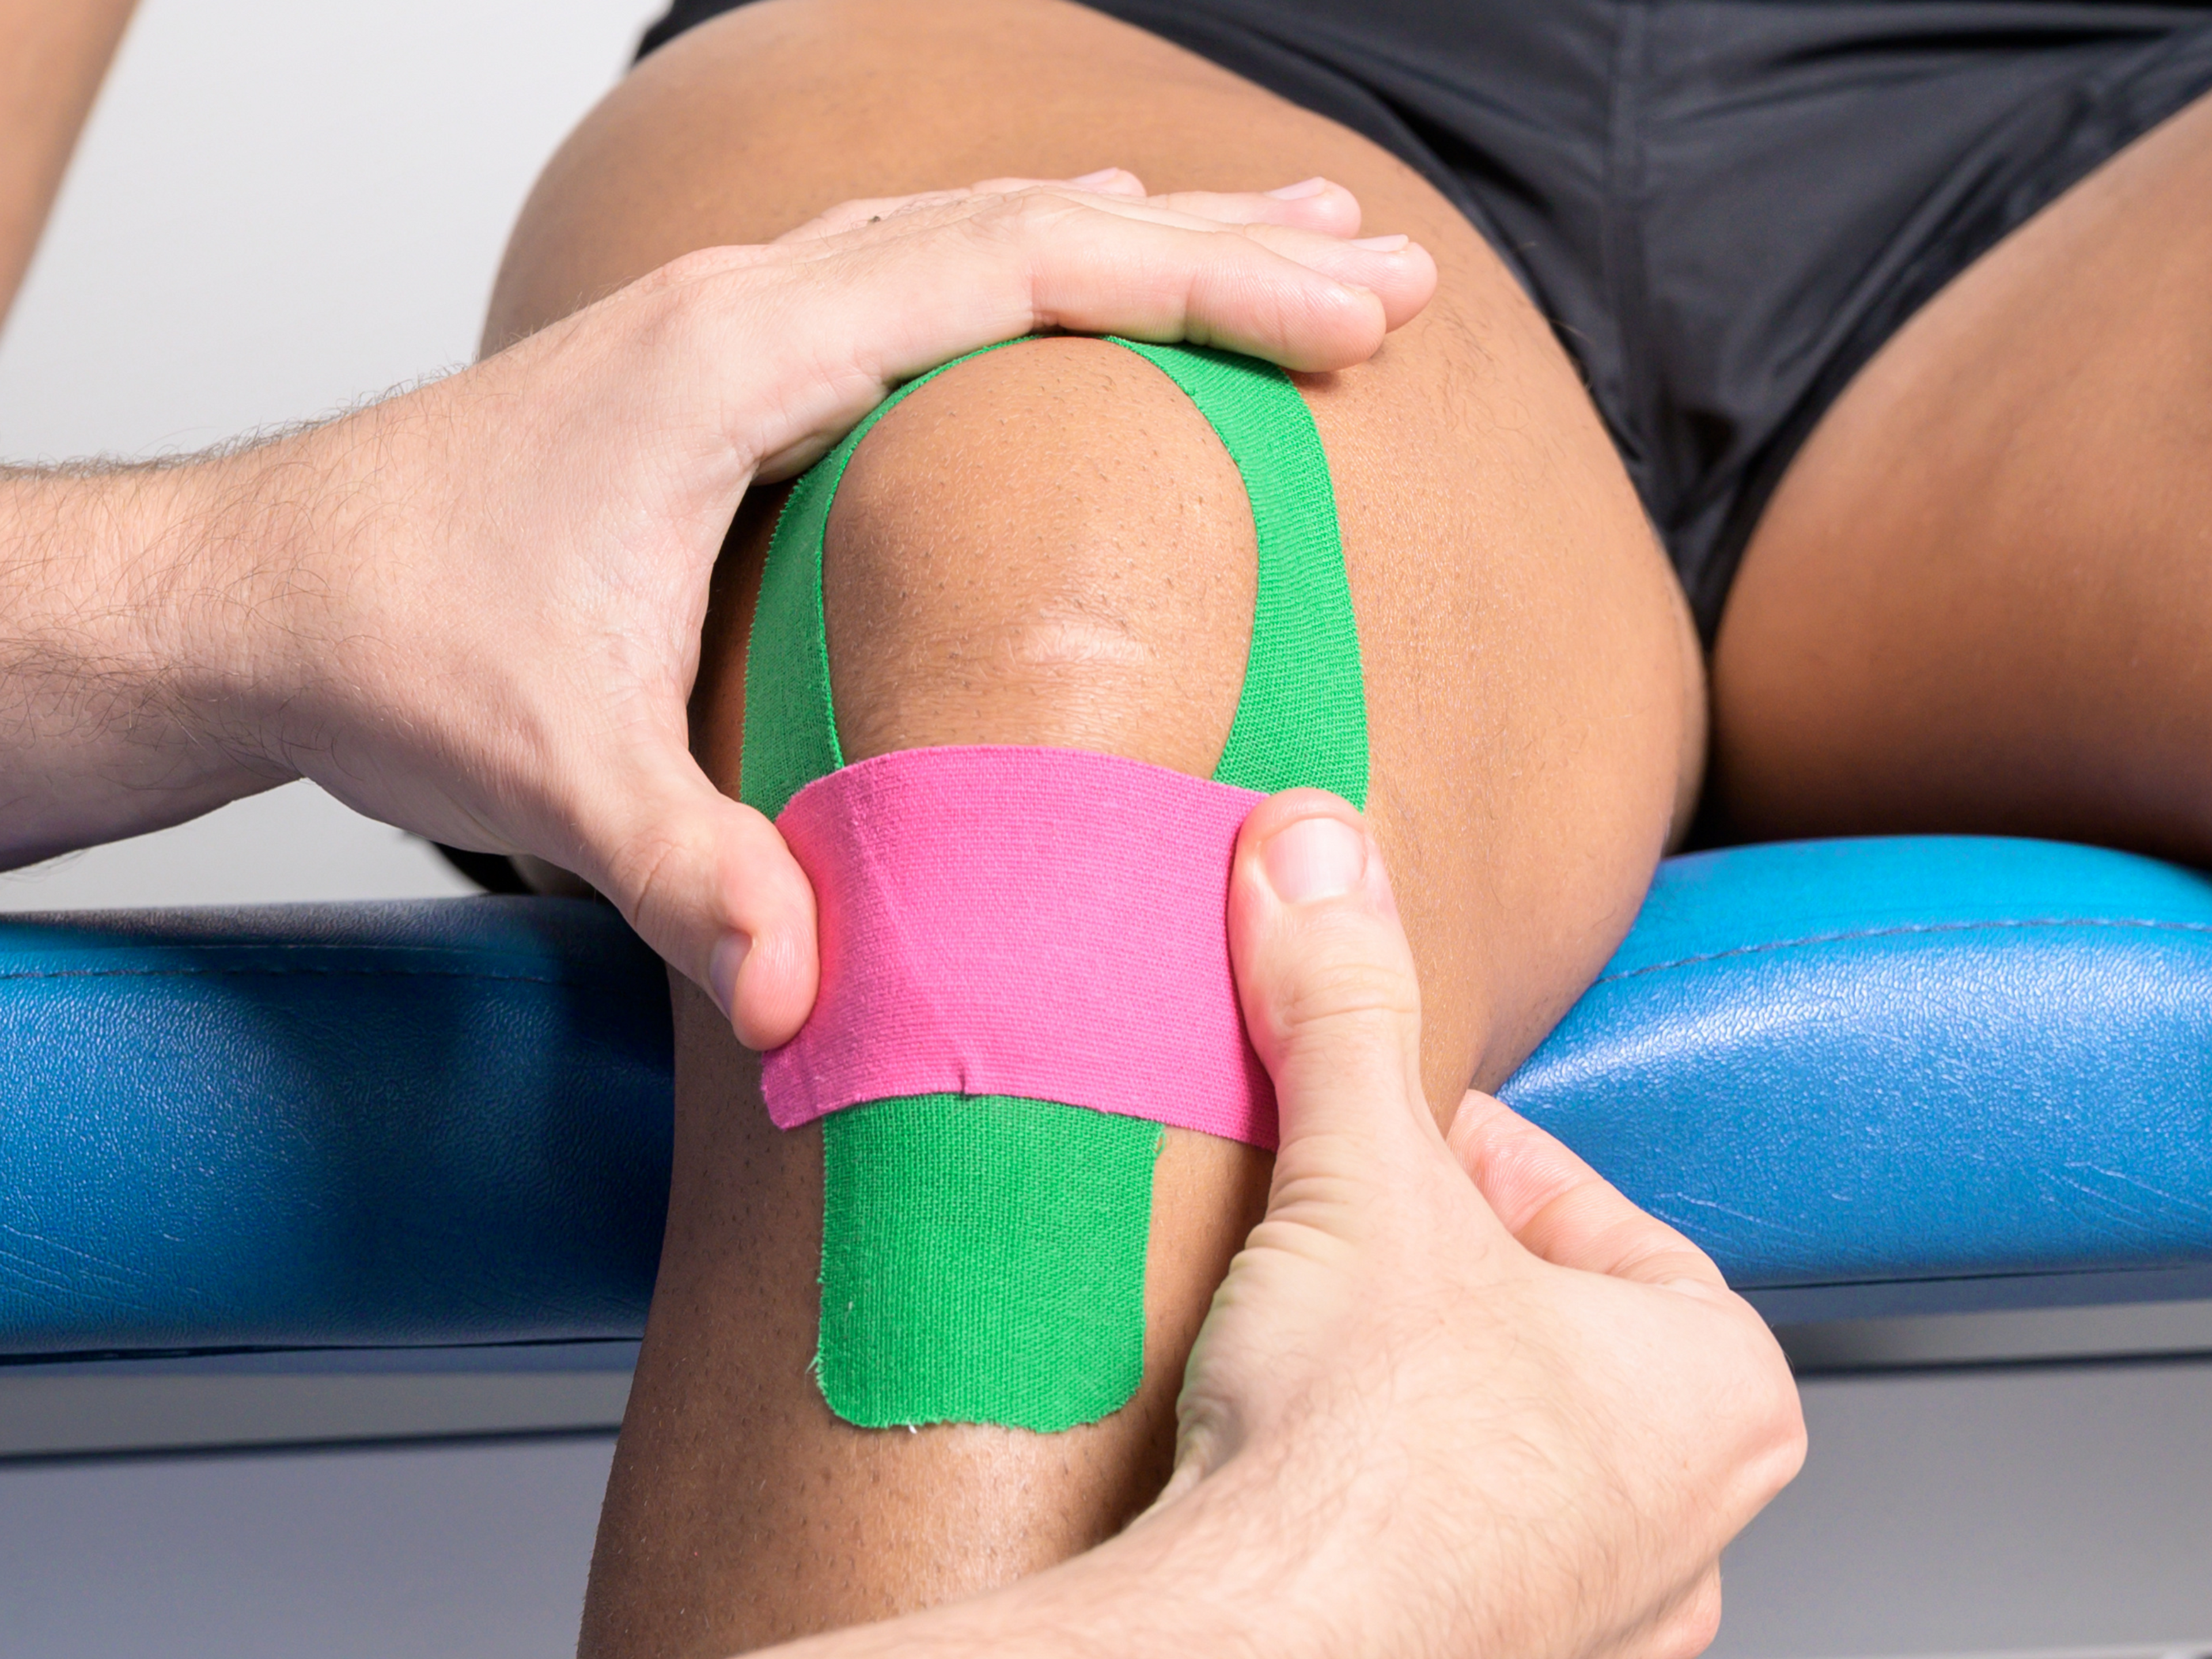 Patellar tendon straps or taping can help with patellar tendonitis pain during rehab exercises and sports.